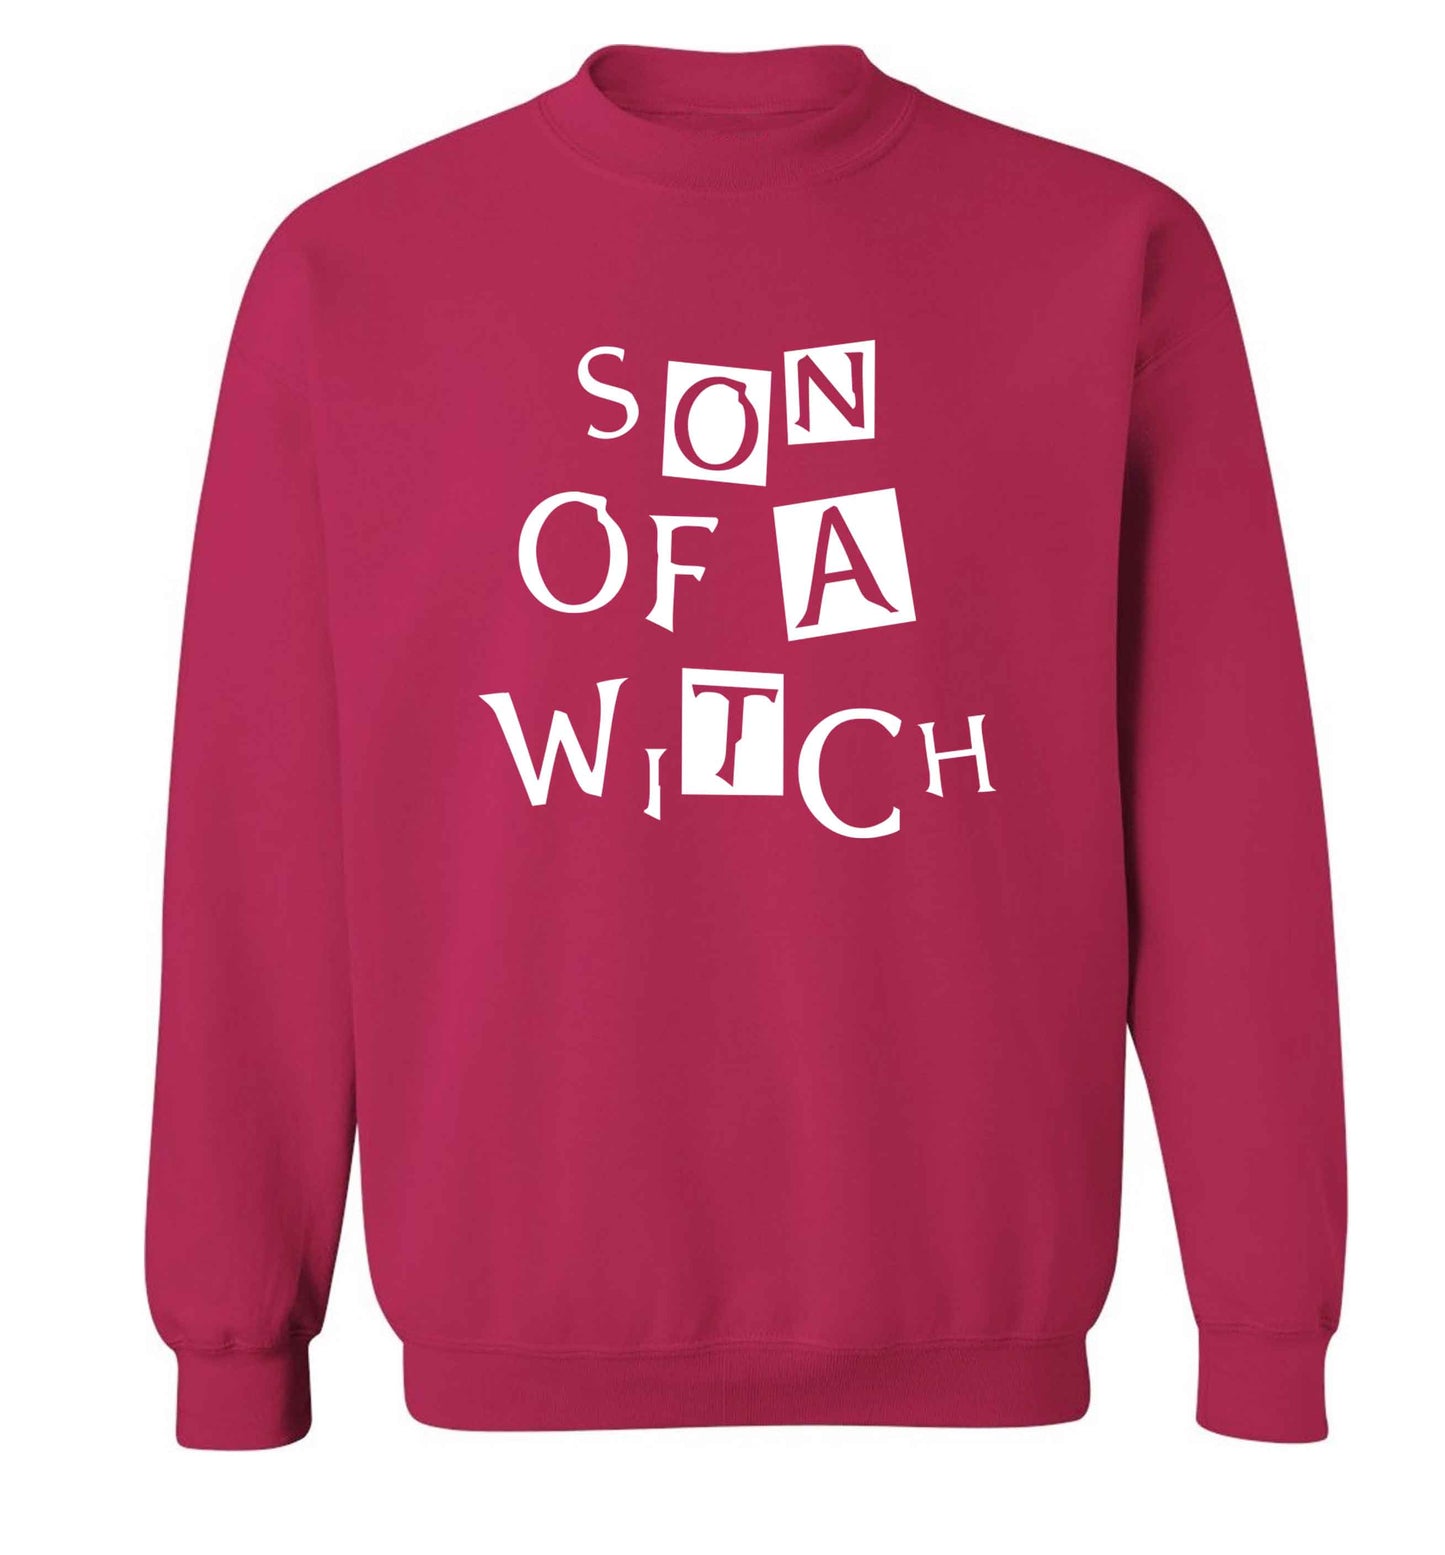 Son of a witch adult's unisex pink sweater 2XL